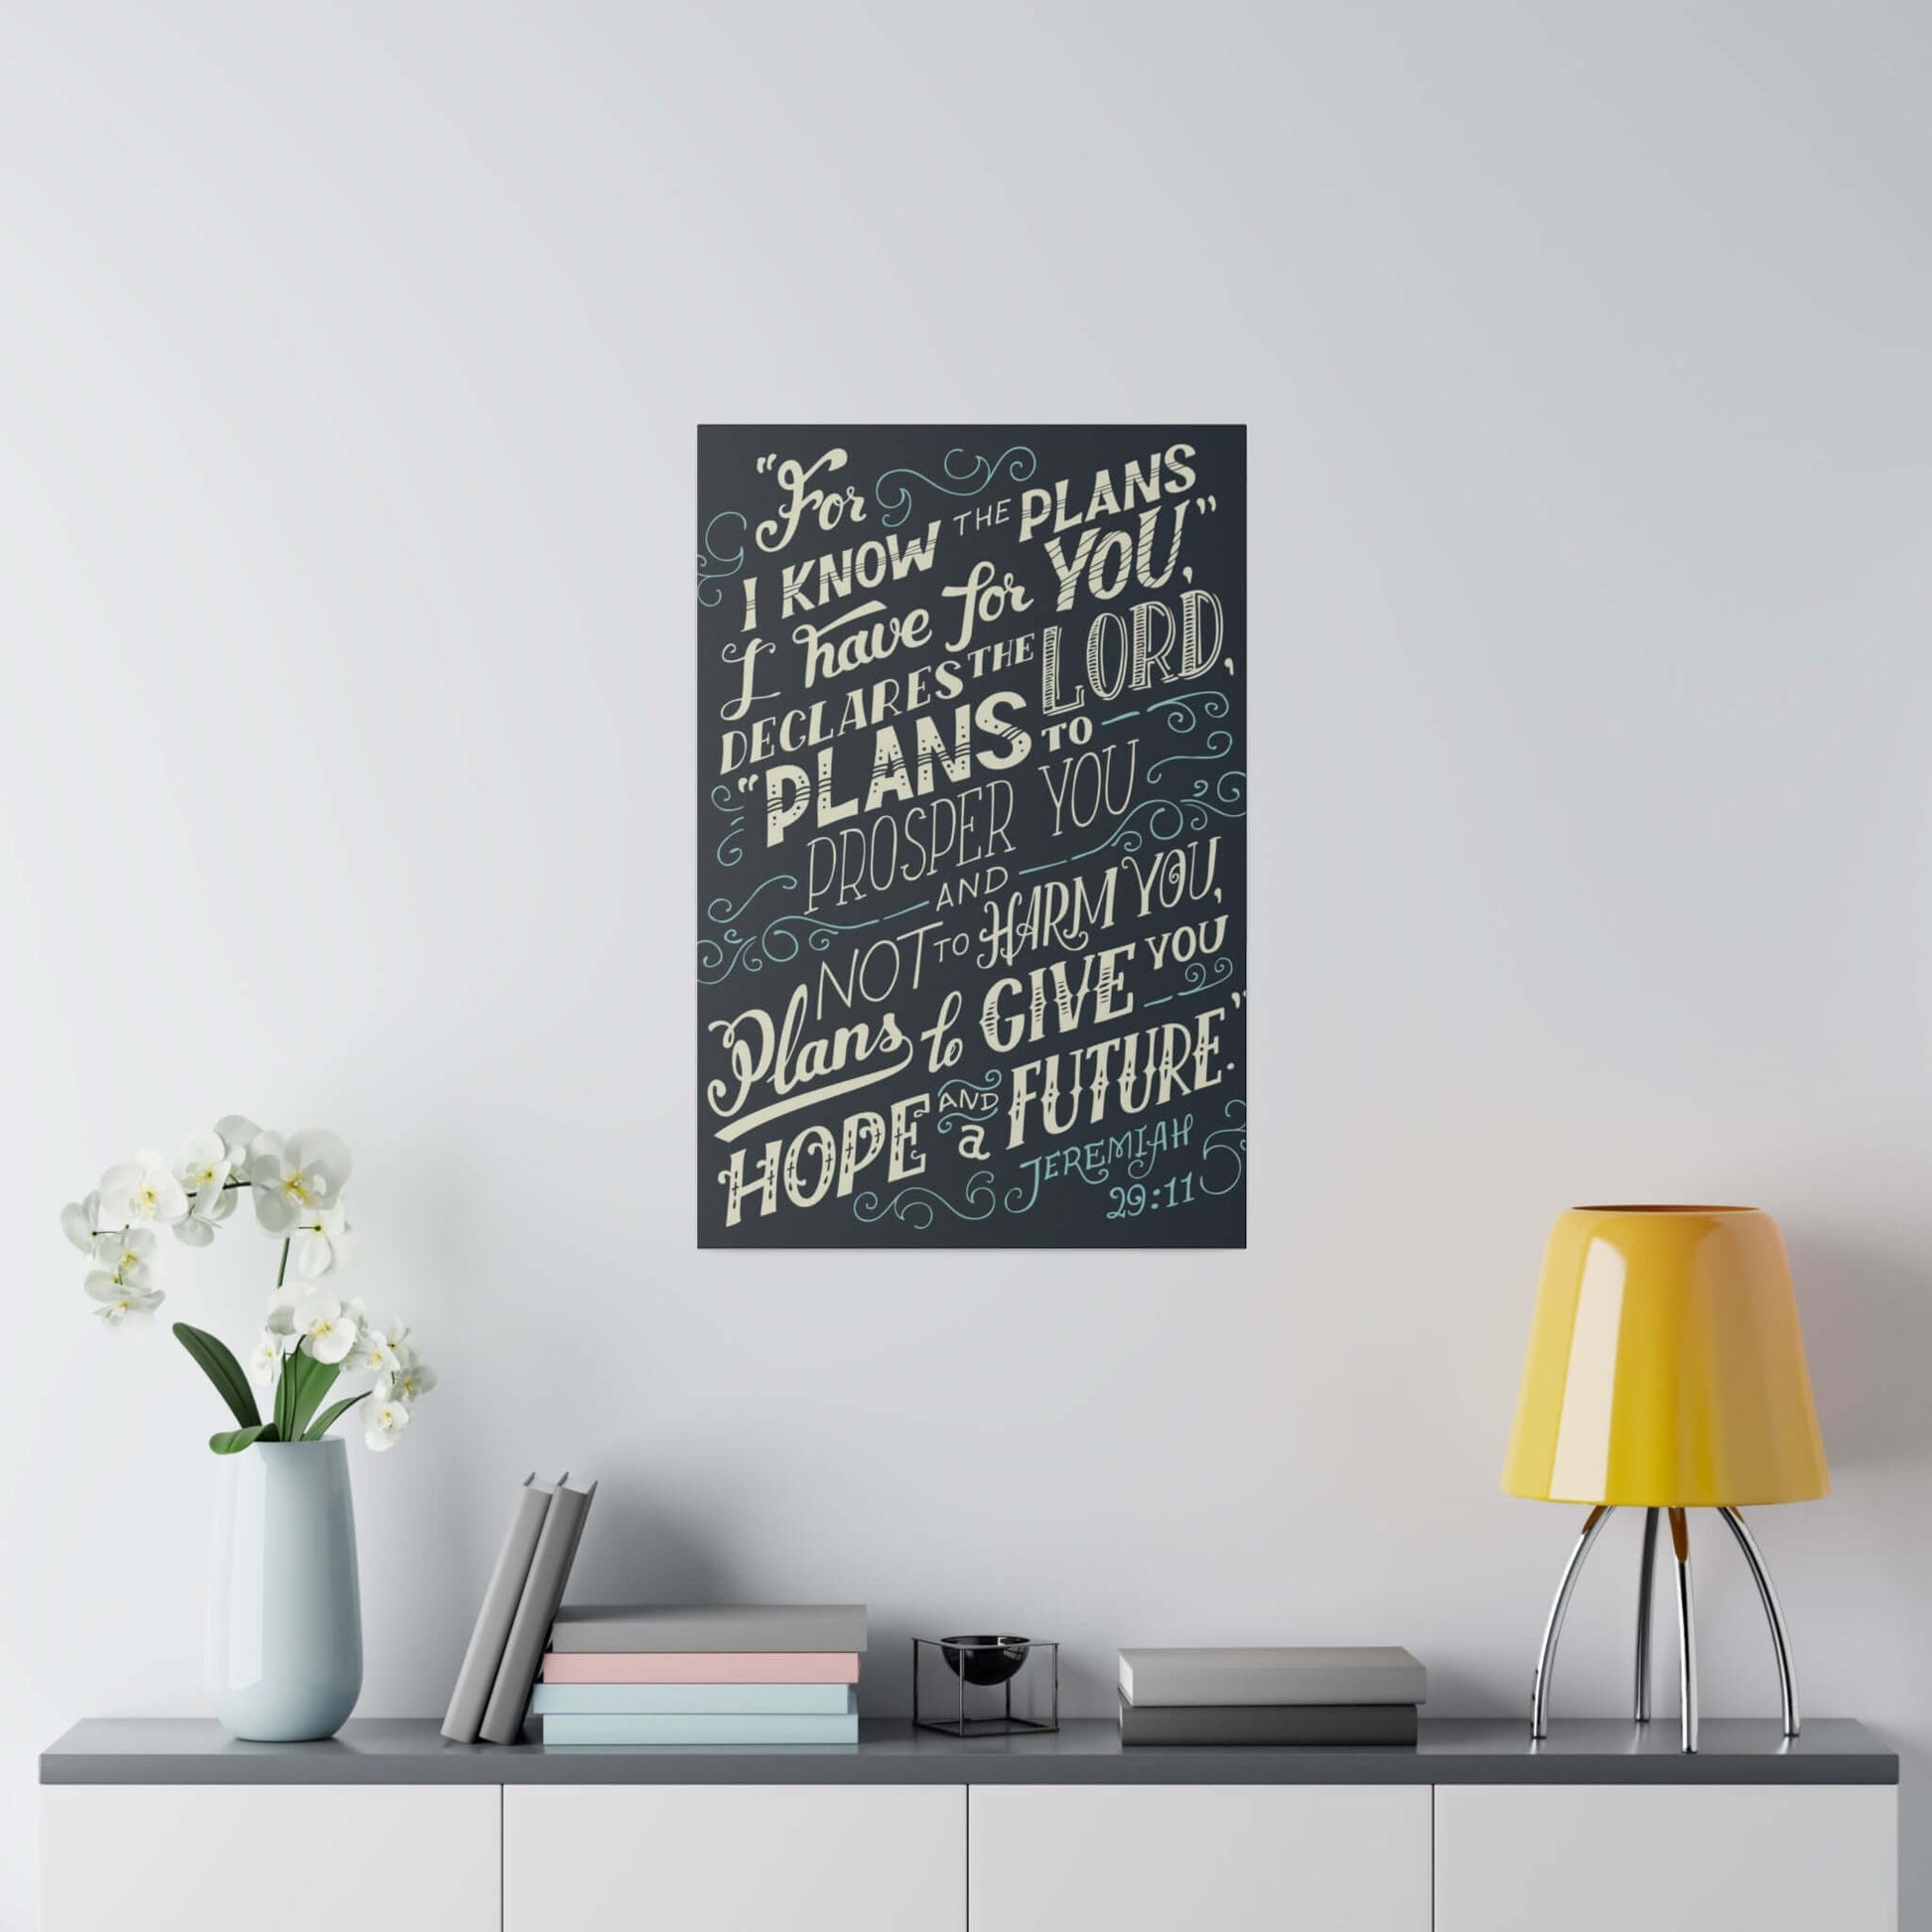 Eco-Friendly Hanging Canvas Prints - Jeremiah 29:11 Verse, Unframed | Art & Wall Decor,Canvas,Decor,Eco-friendly,Hanging Hardware,Holiday Picks,Home & Living,Indoor,Matte,Seasonal Picks,Sustainable,Wall,Wood